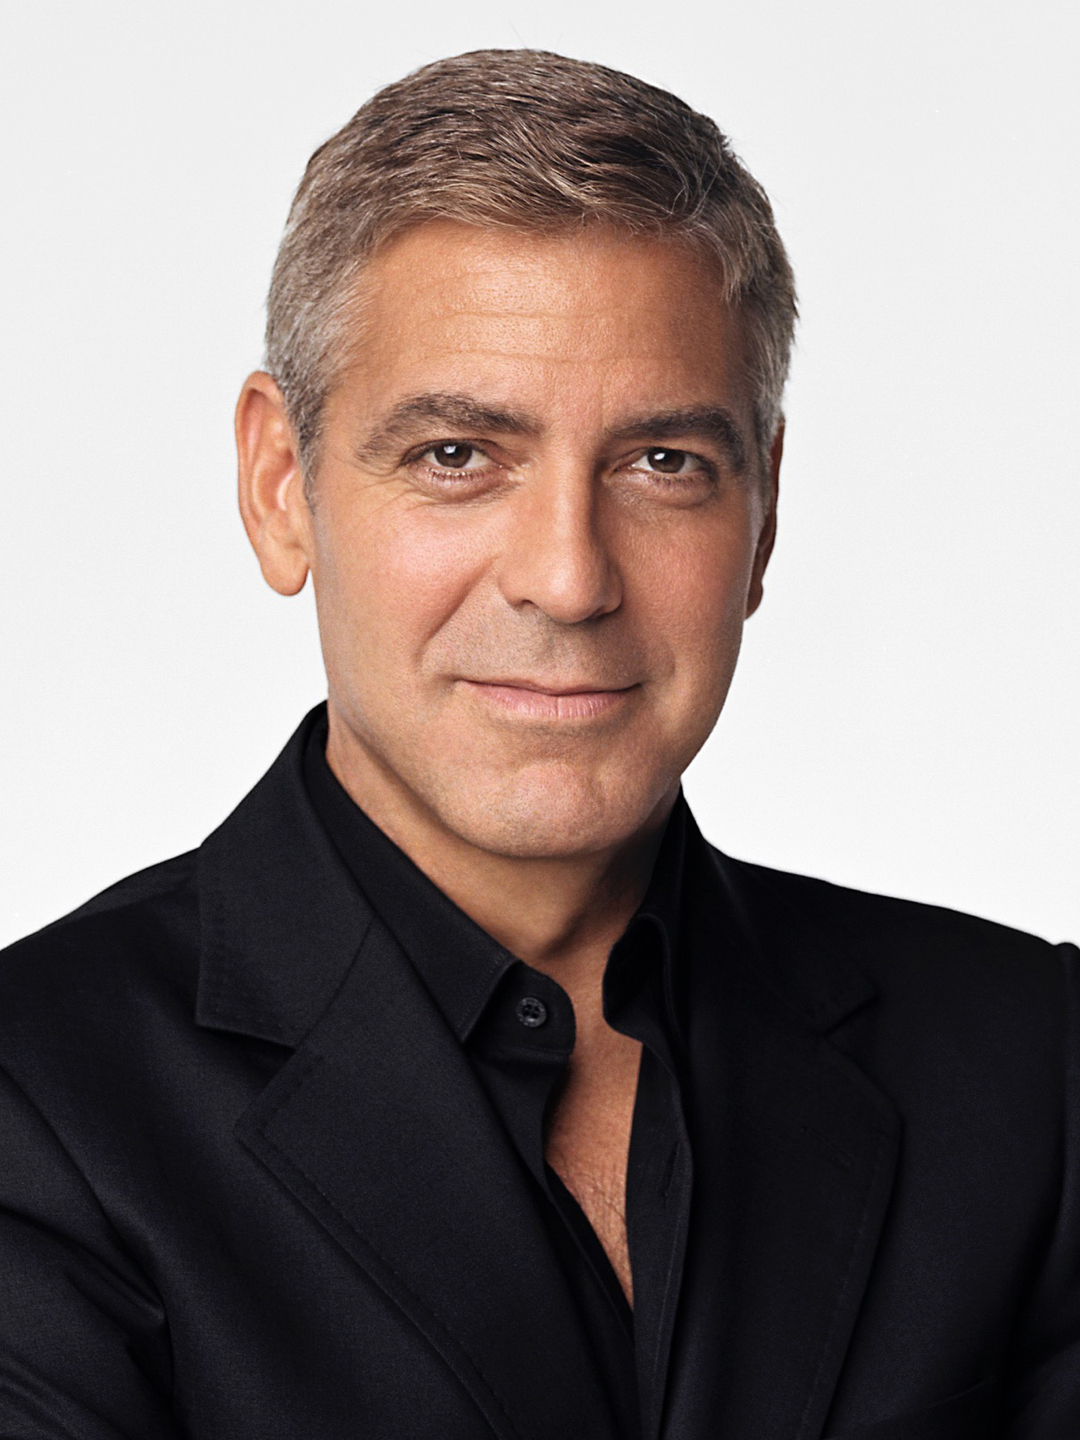 George Clooney young age